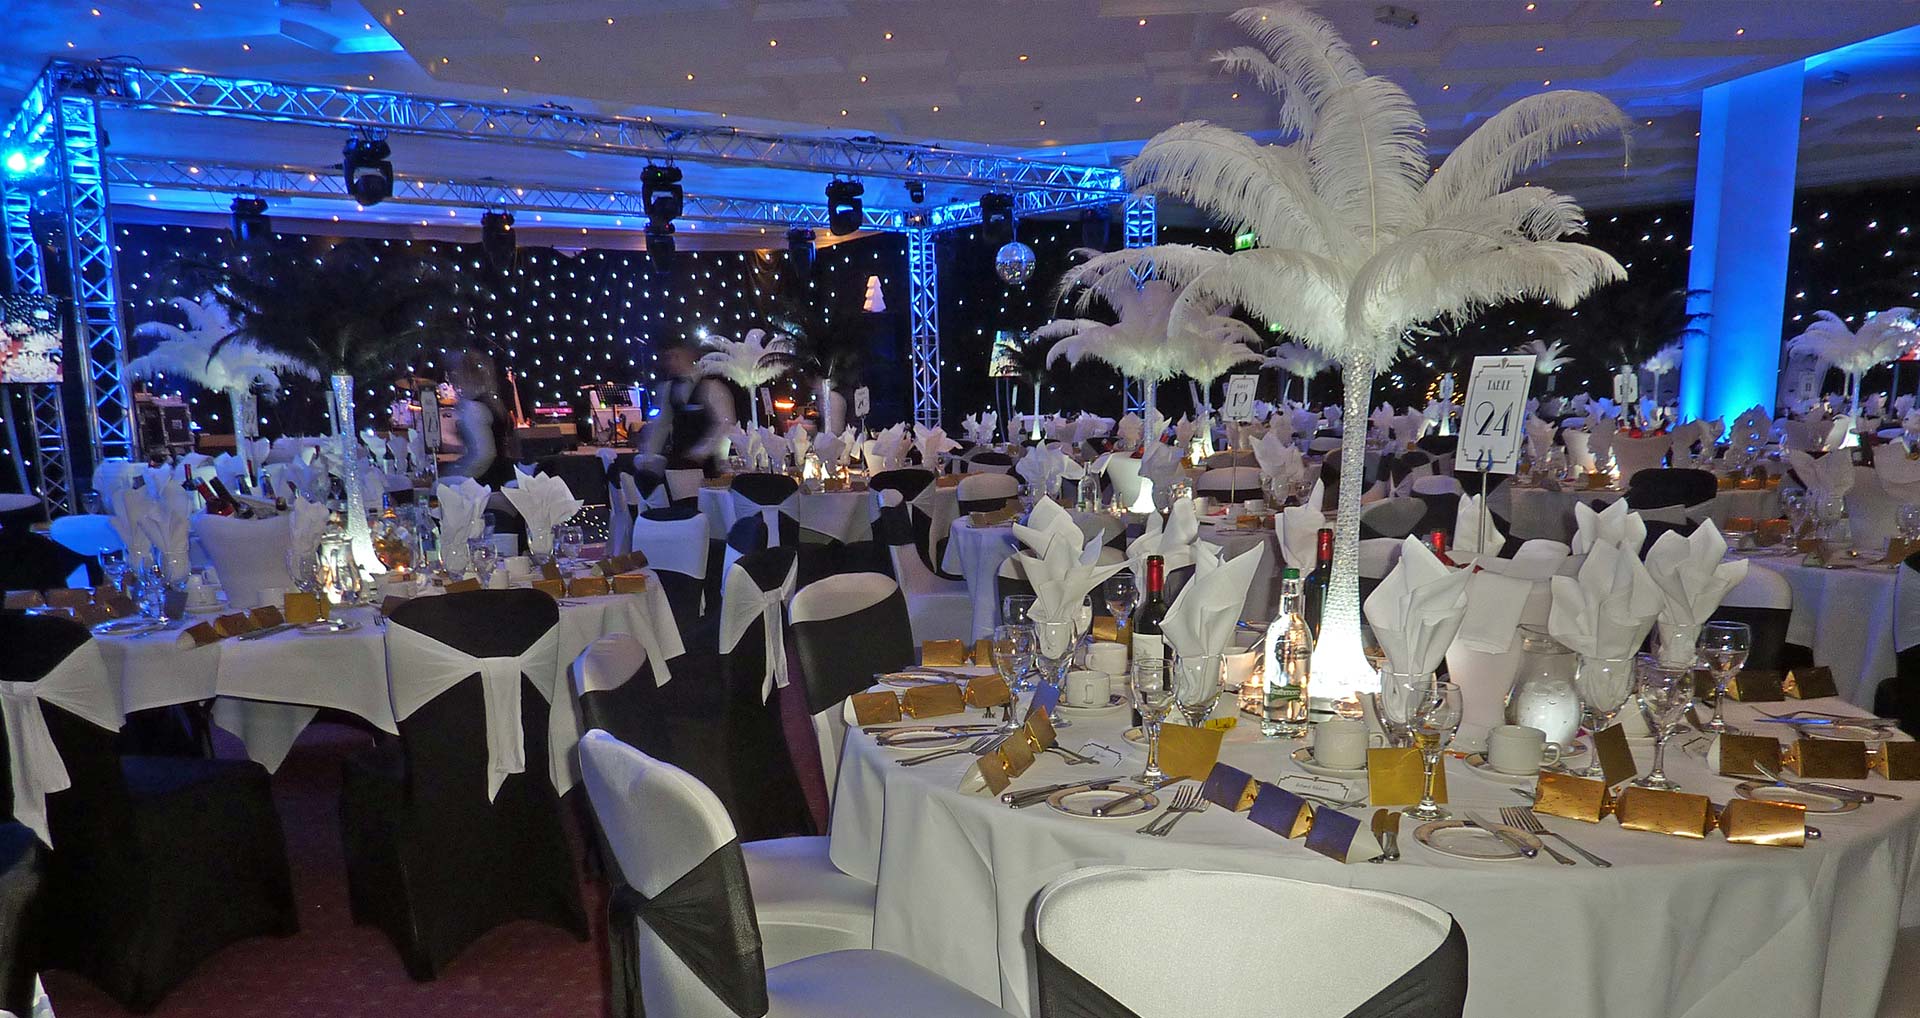 Hire our high quality centrepieces to light up your event